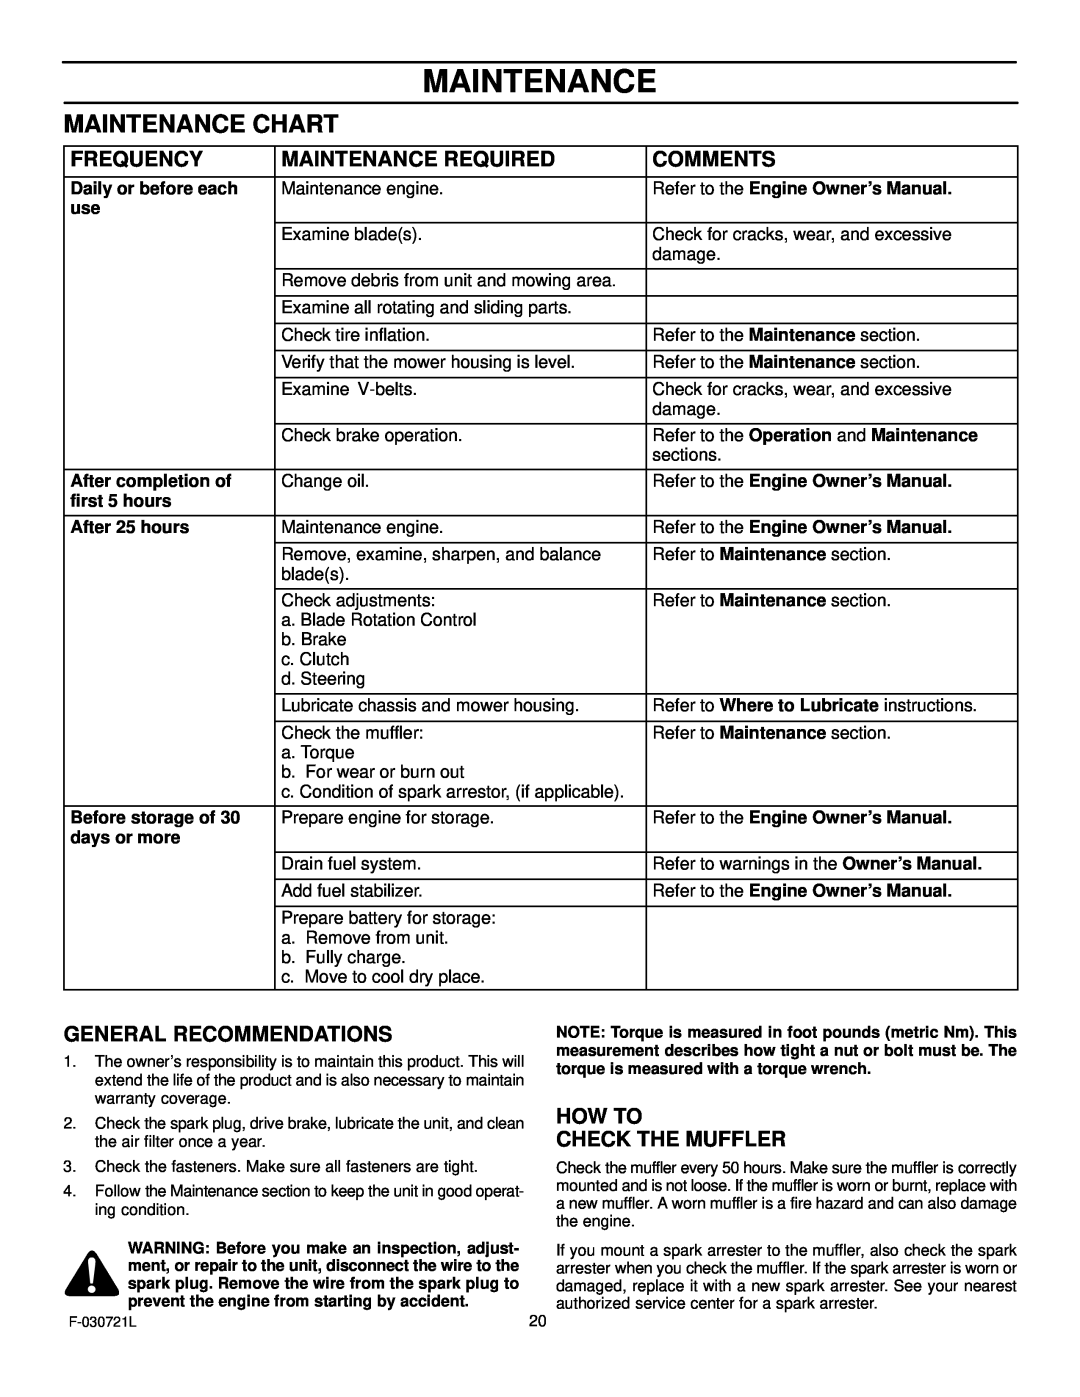 Murray 425007x92B manual Maintenance Chart, Frequency, Maintenance Required, Comments, General Recommendations 